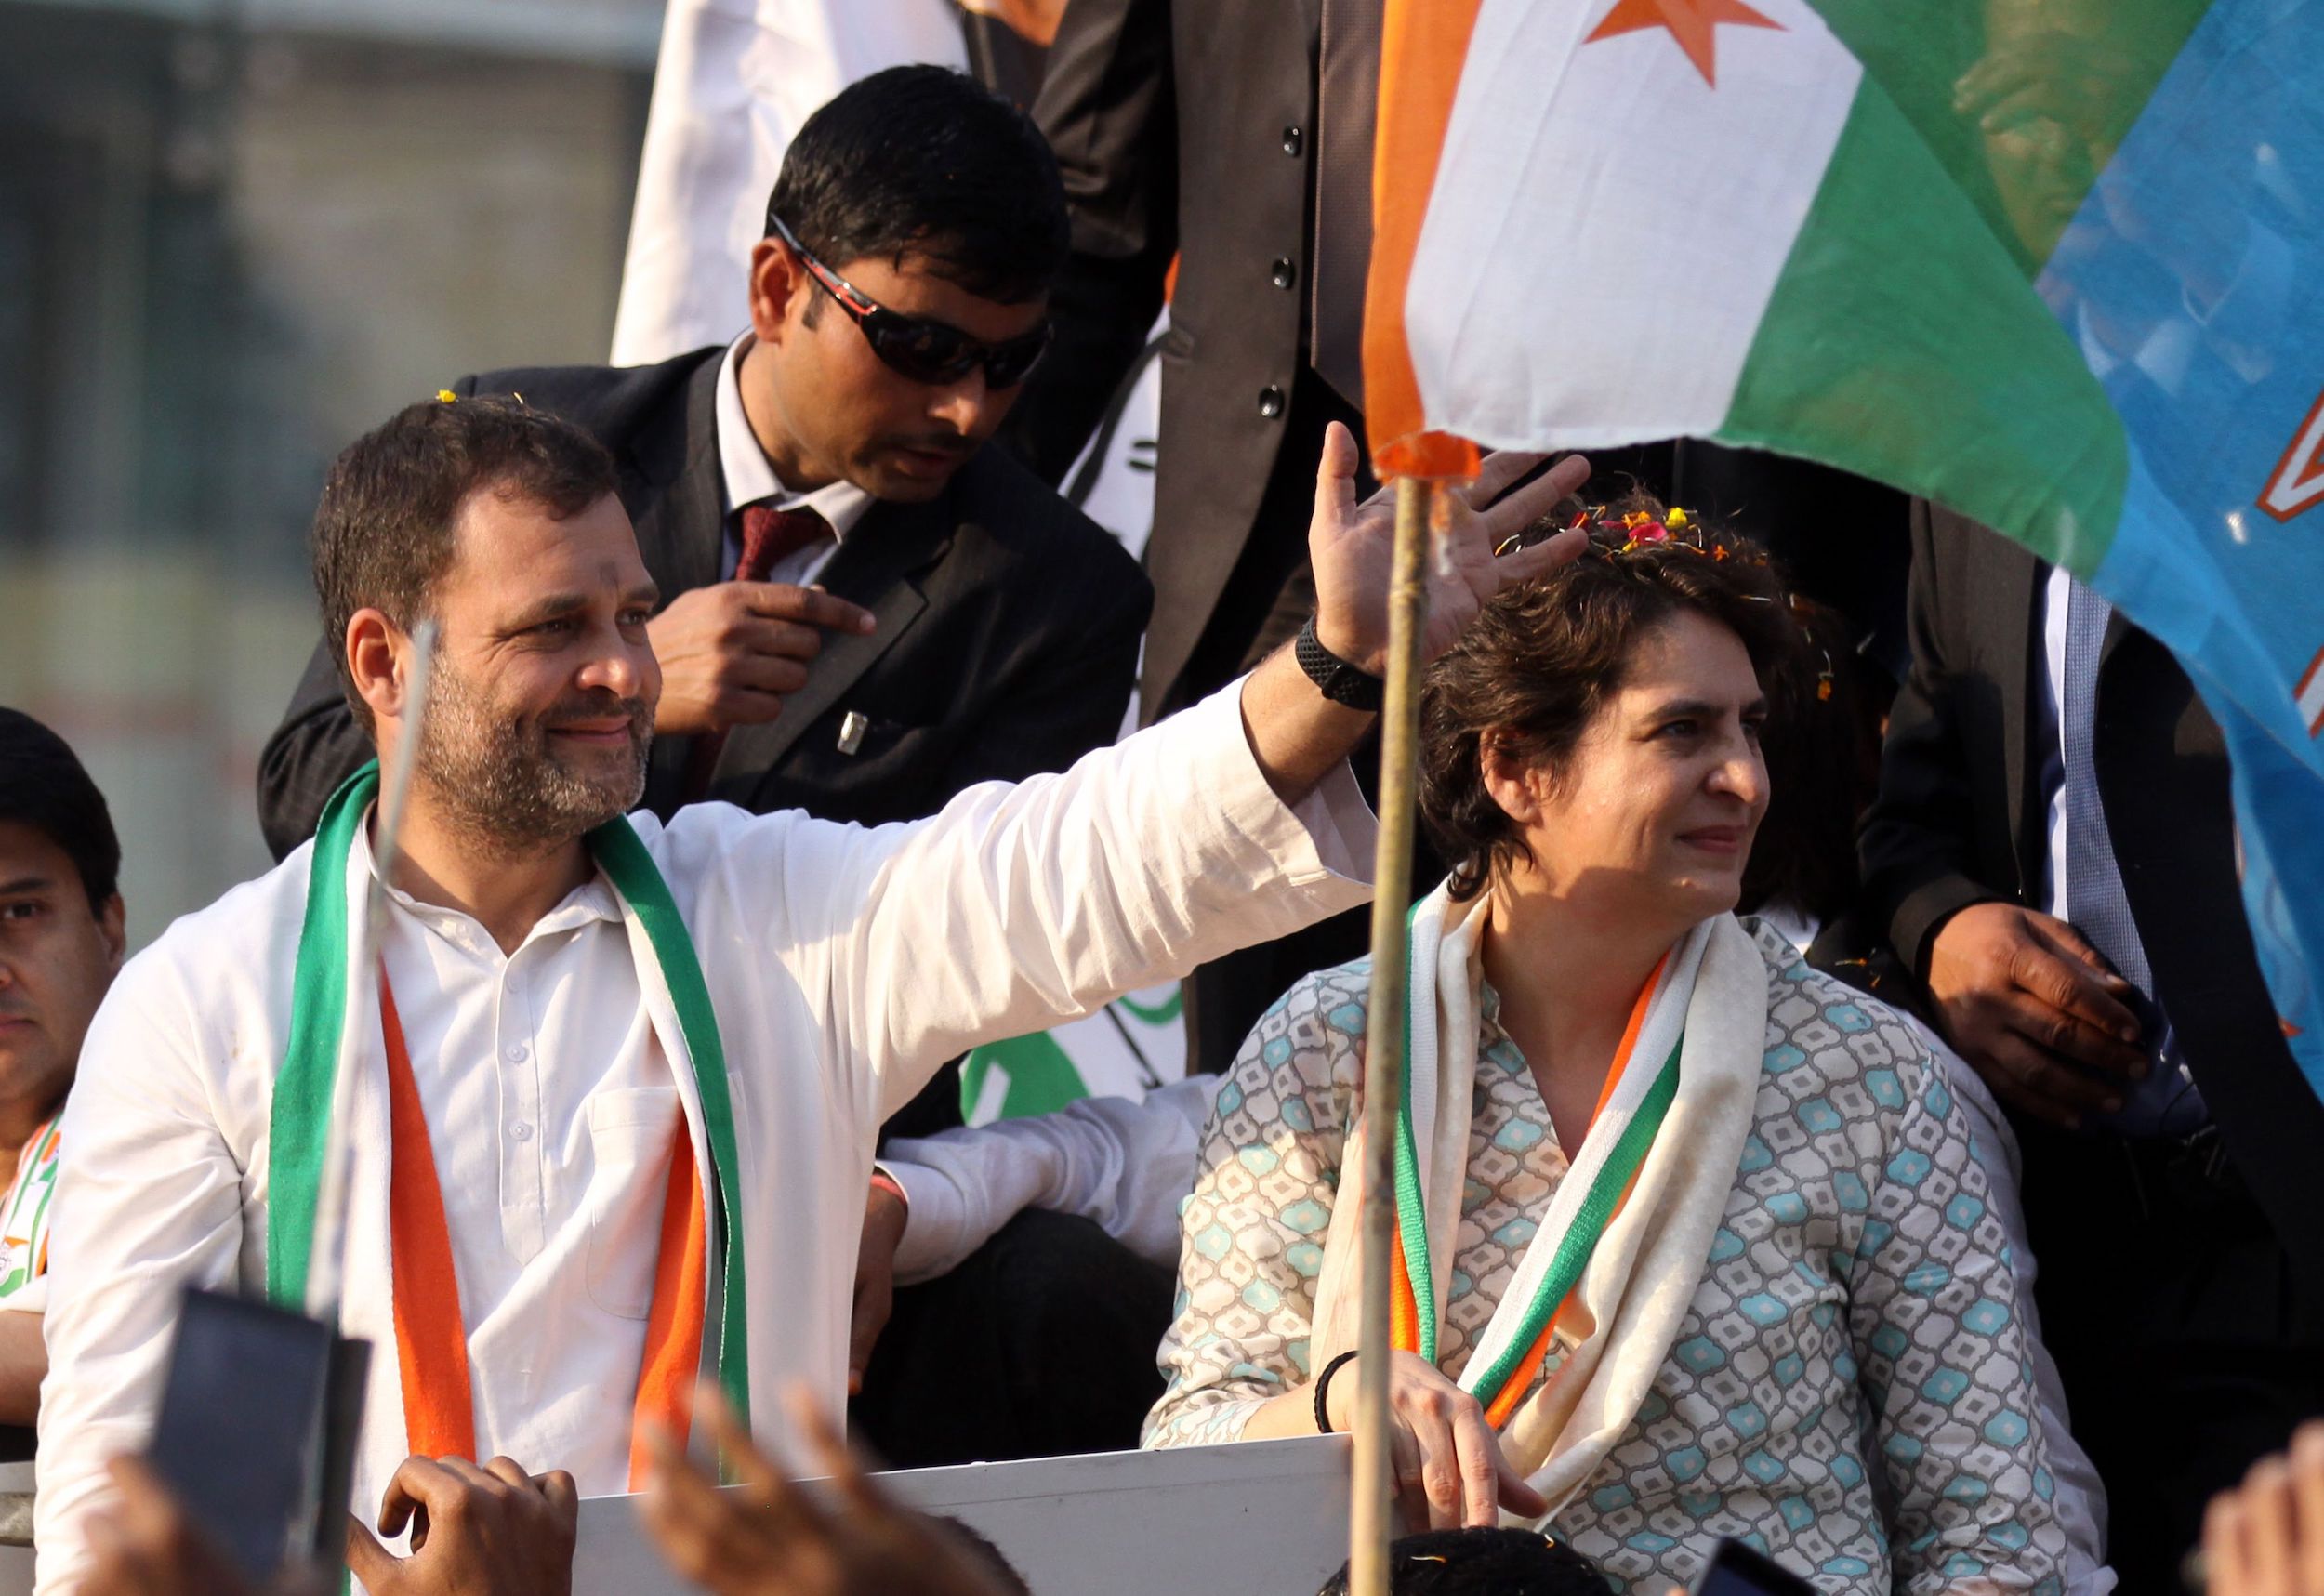 Indian Congress Party leader Rahul Gandhi at a rally next to his sister Priyanka Gandhi Vadra in Lucknow, the capital of the election bellwether Uttar Pradesh state, on February 11, 2019.